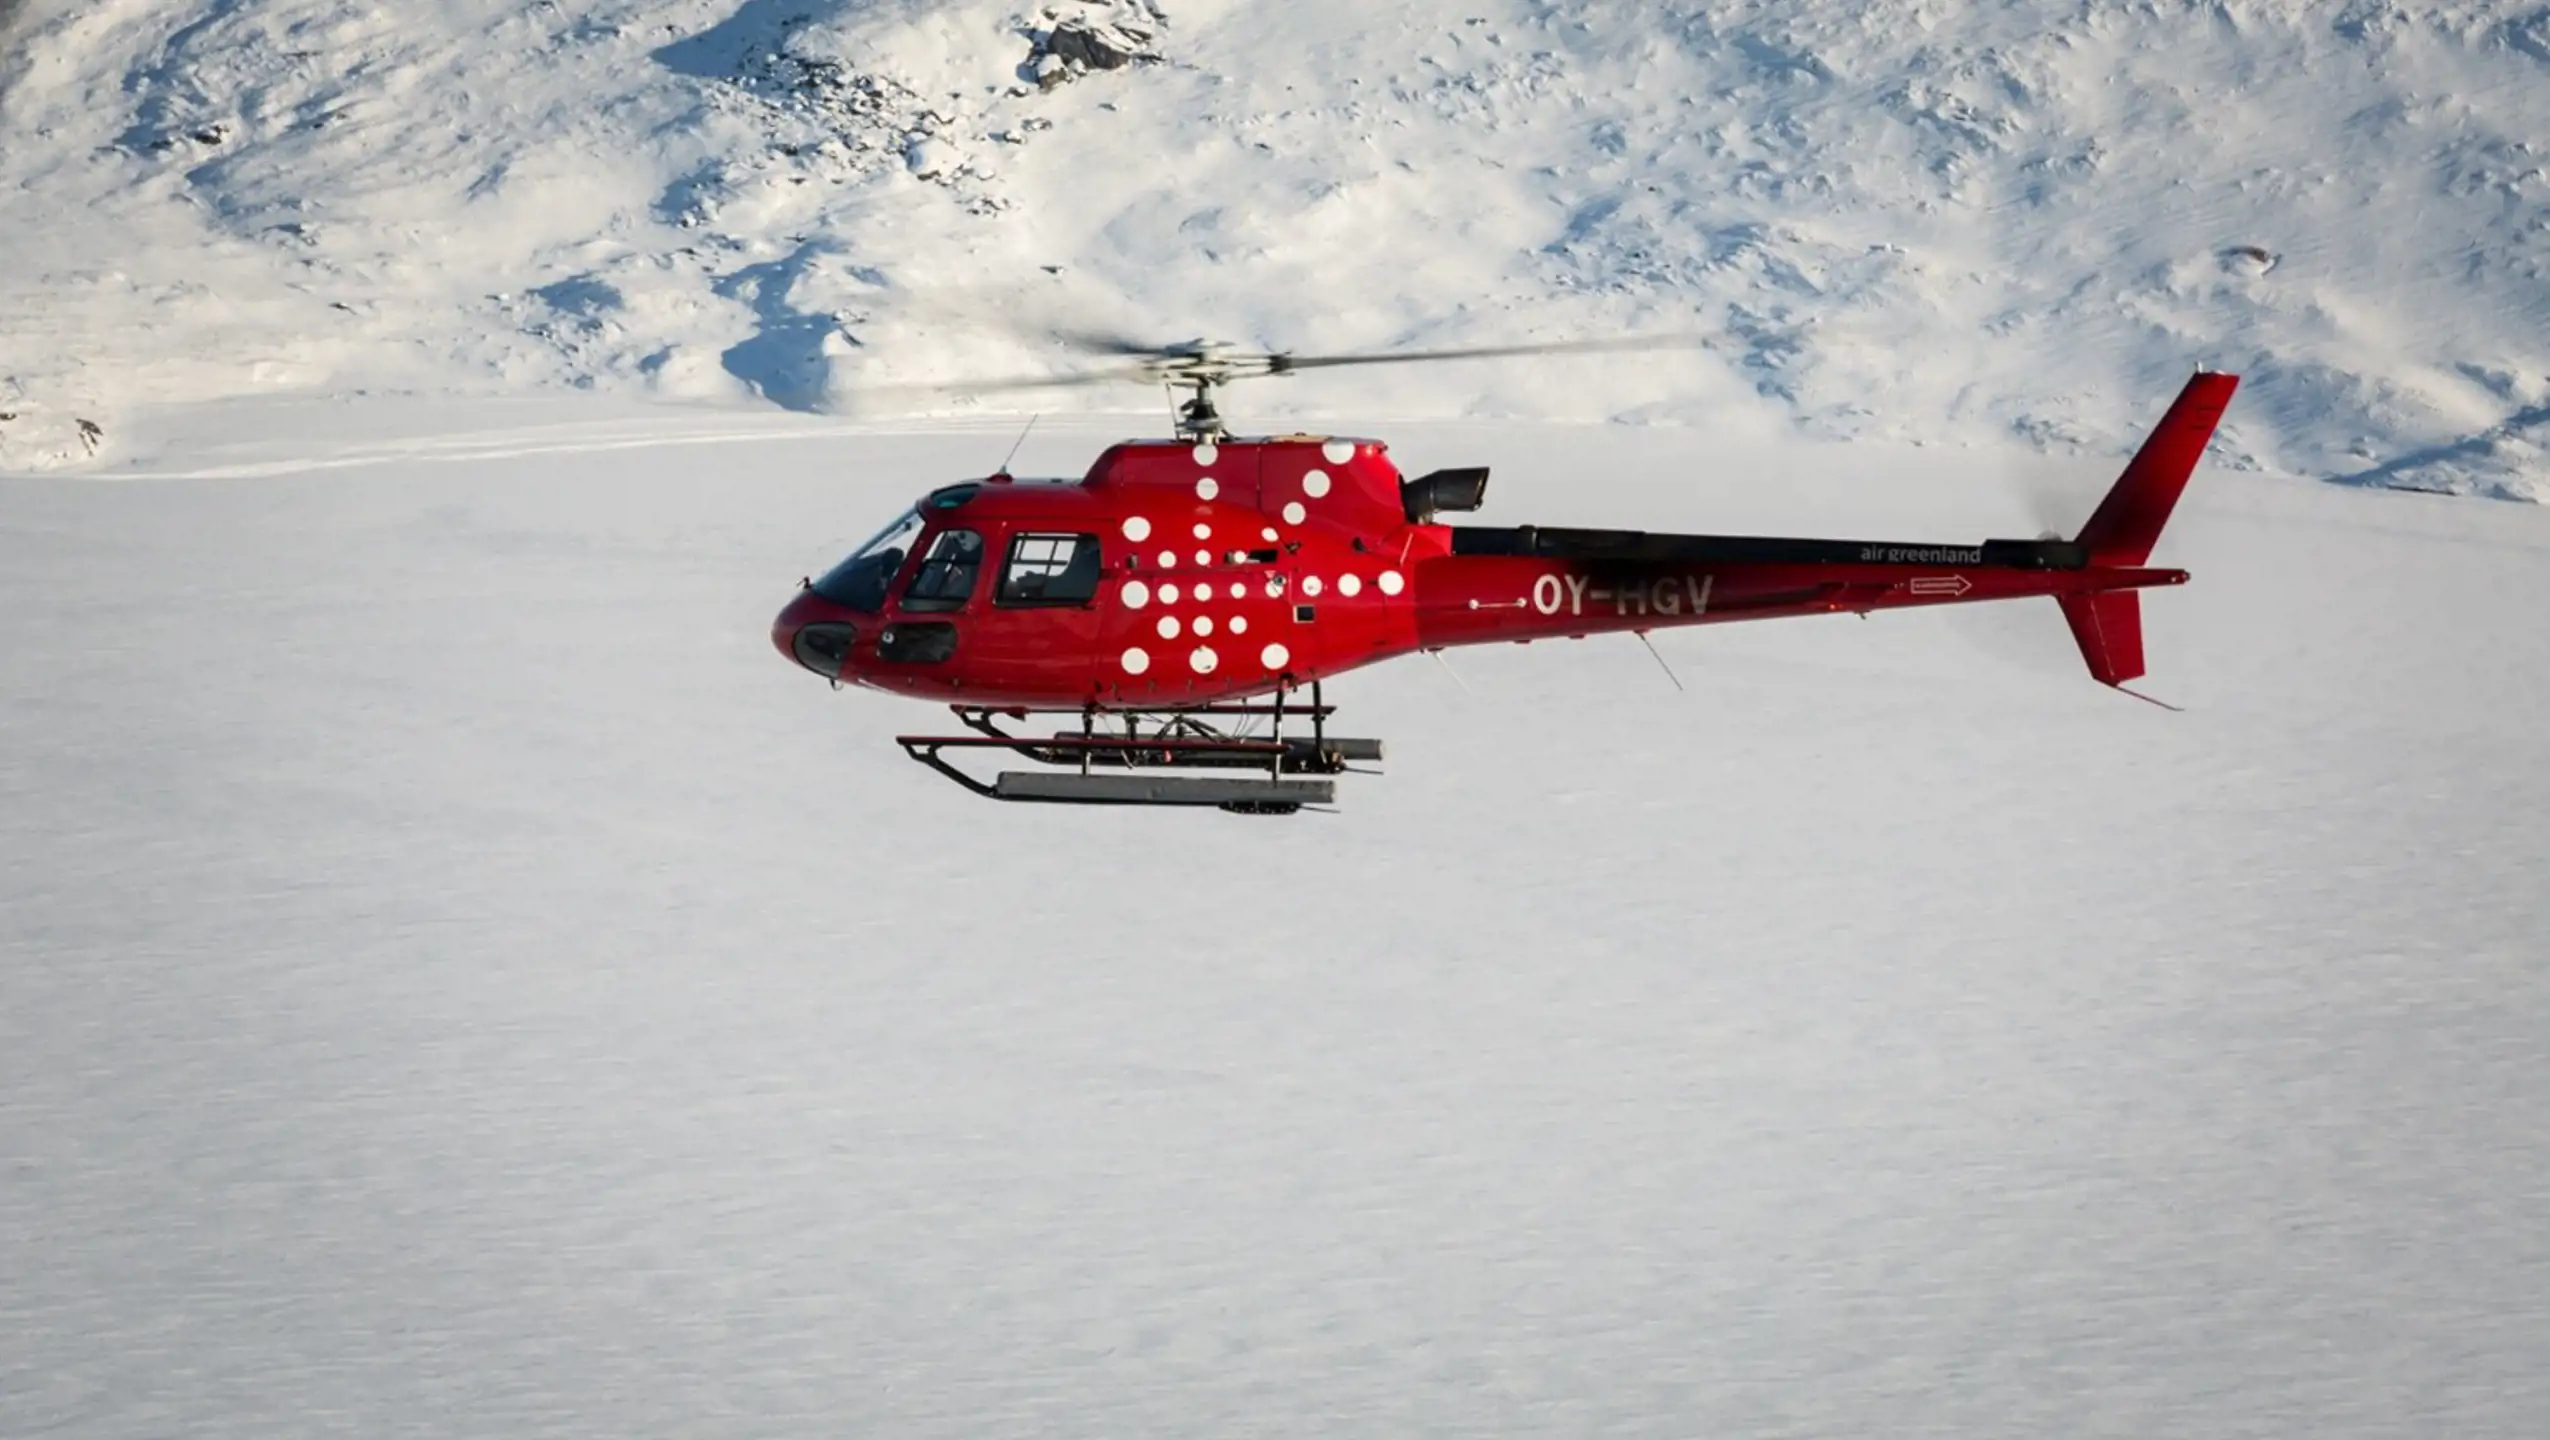 Air Greenland Partners with Loft Dynamics to Bring VR Flight Training to Greenland